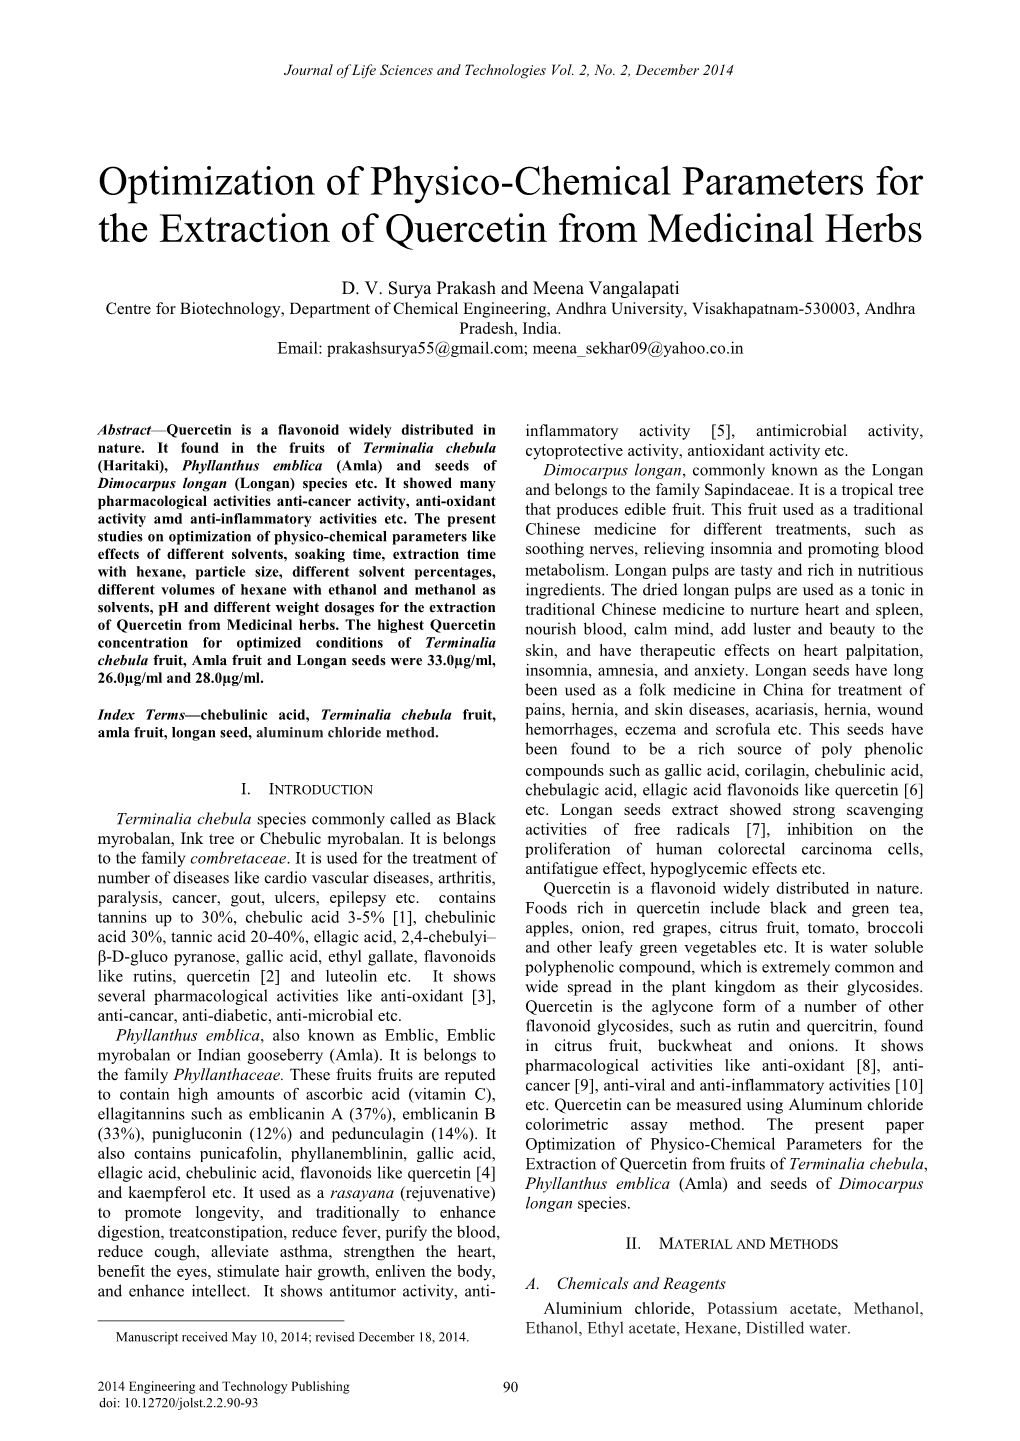 Optimization of Physico-Chemical Parameters for the Extraction of Quercetin from Medicinal Herbs